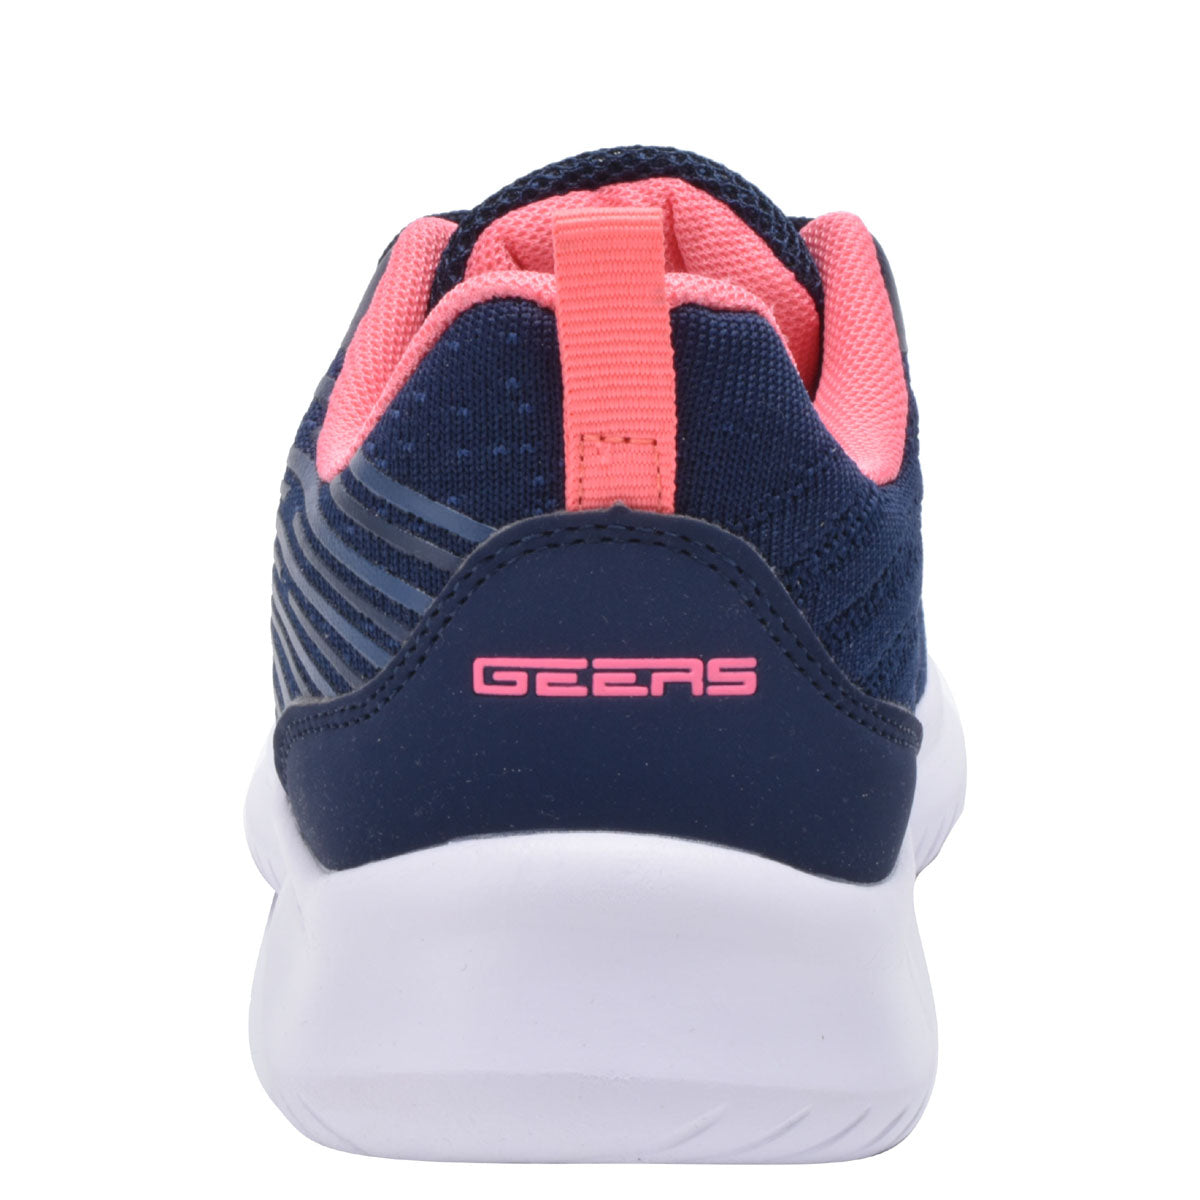 Women comfortable Gym shoes